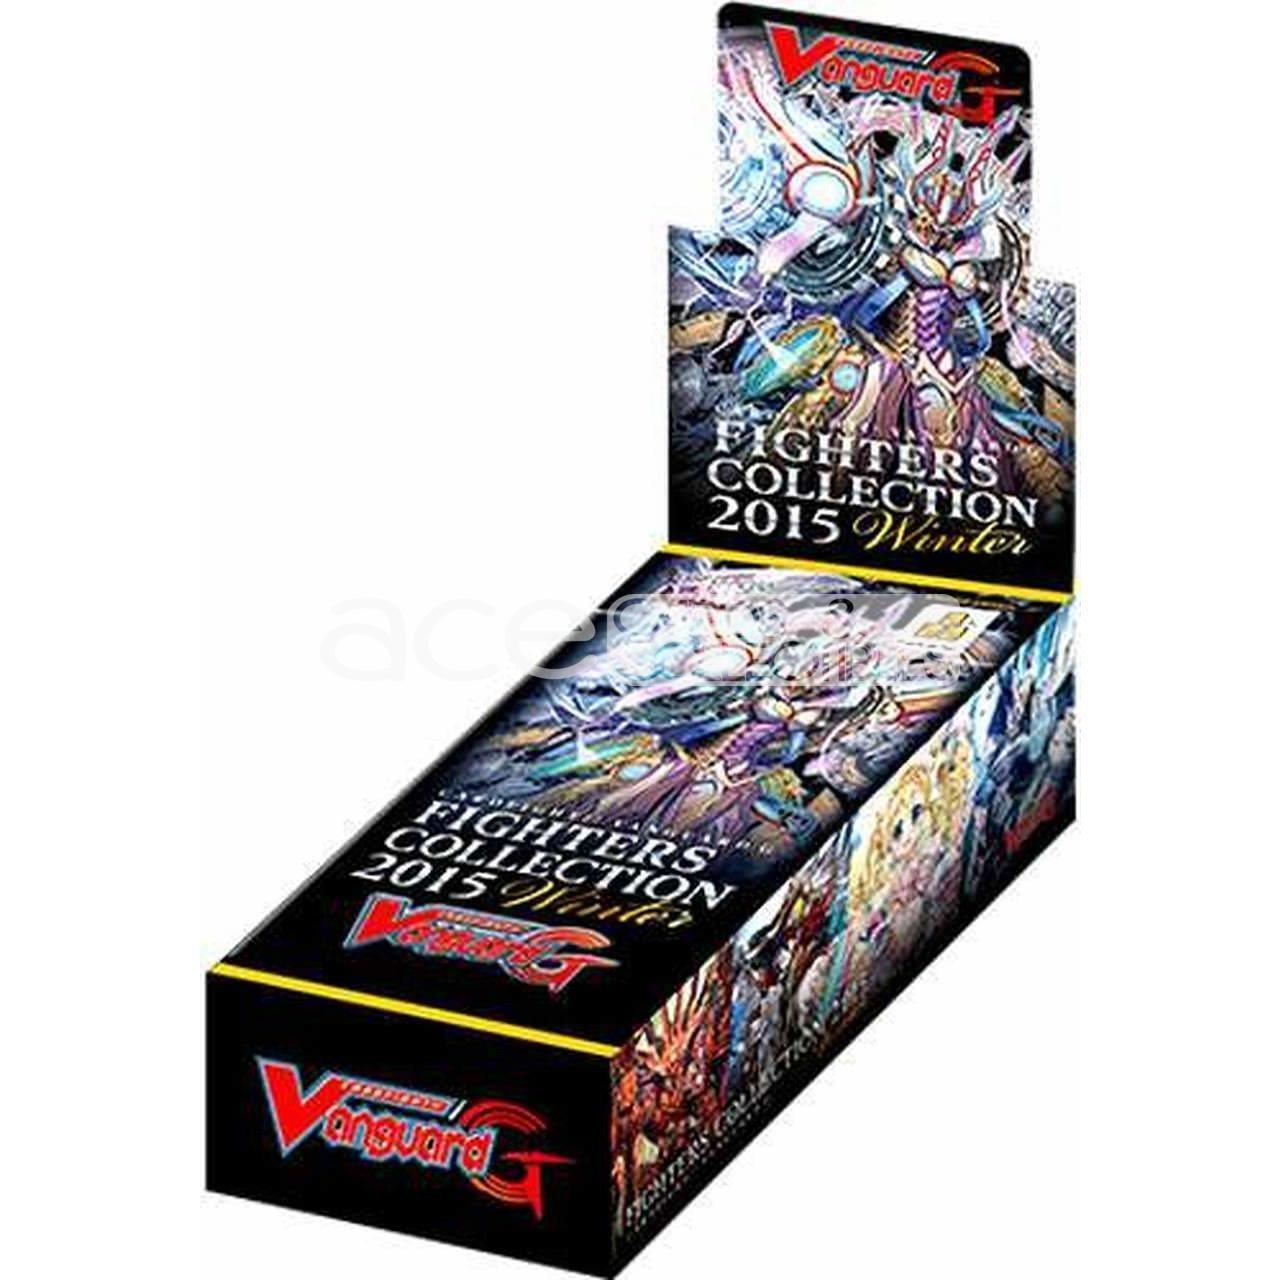 Cardfight Vanguard G Fighters Collection 2015 Winter [VGE-G-FC02] (English)-Single Pack (Random)-Bushiroad-Ace Cards & Collectibles